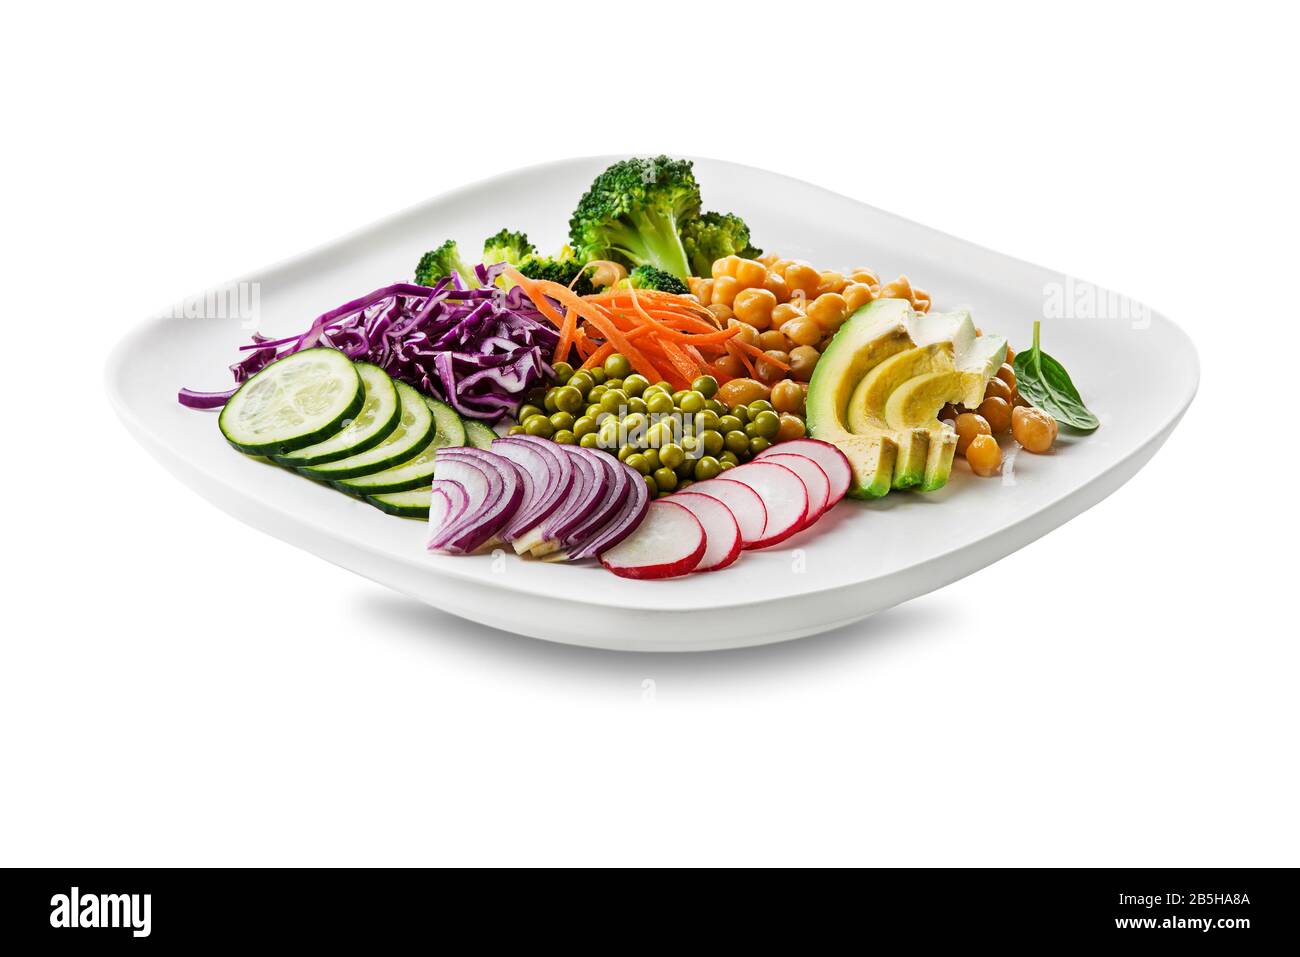 Healthy vegan lunch plate isolated on white. Avocado, chickpeas, broccoli, red cabbage, green peas, red onion and radish vegetables salad. Healthy bal Stock Photo